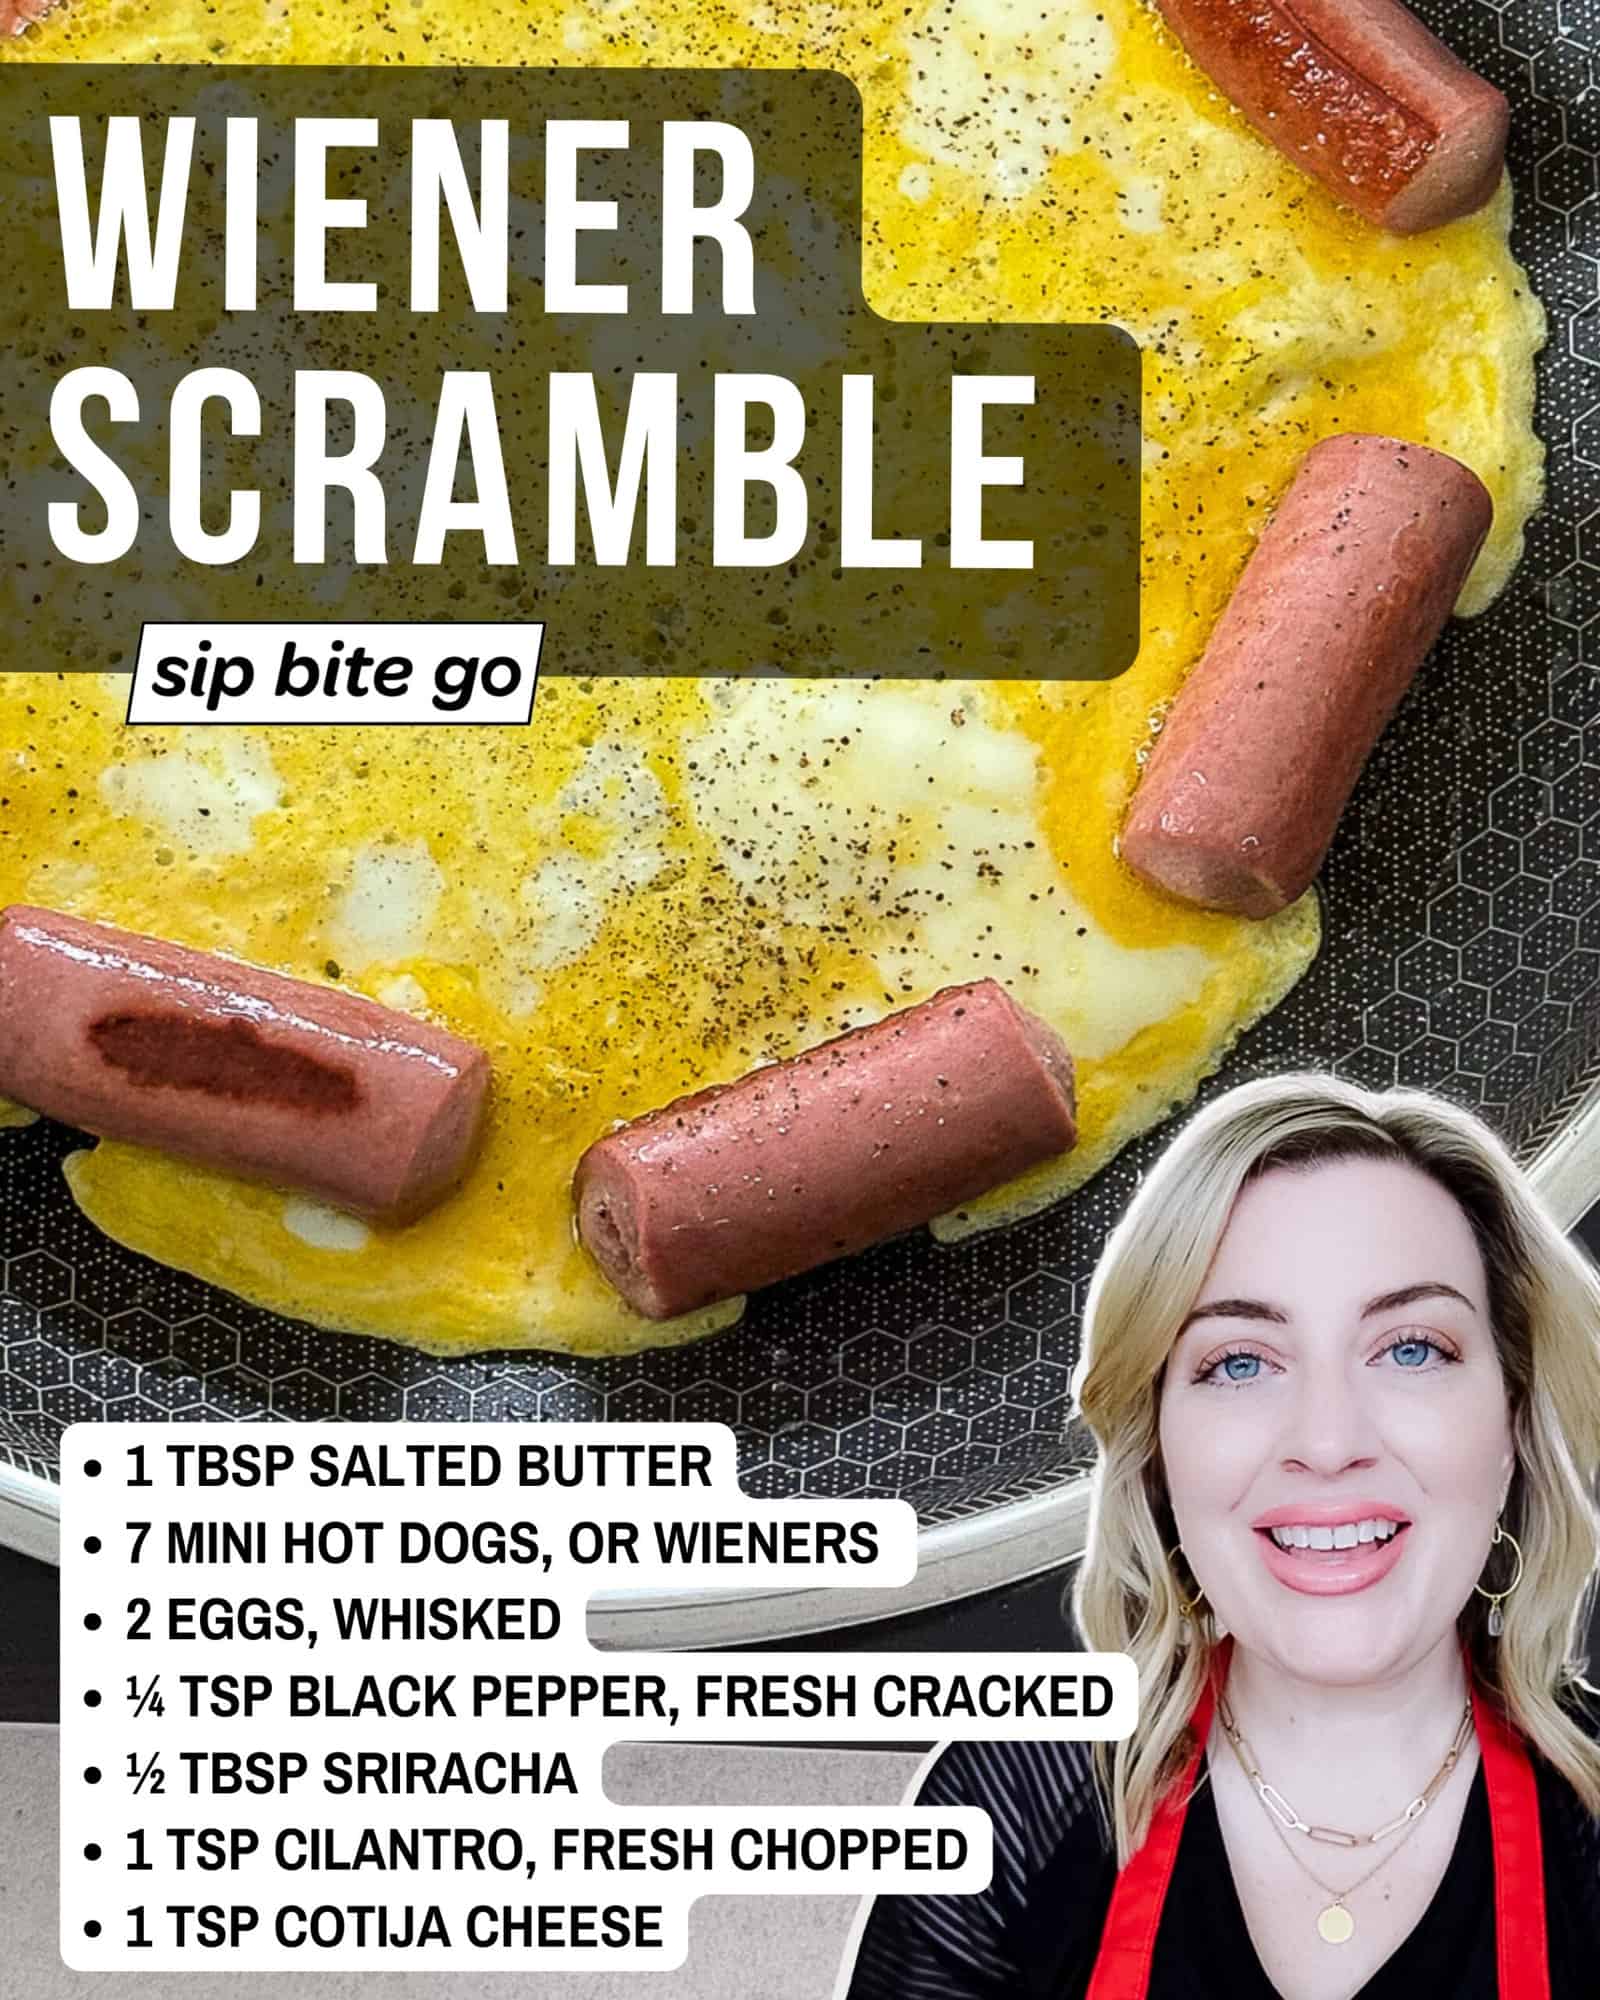 Little Wiener Scramble recipe ingredients list including hot dogs and eggs